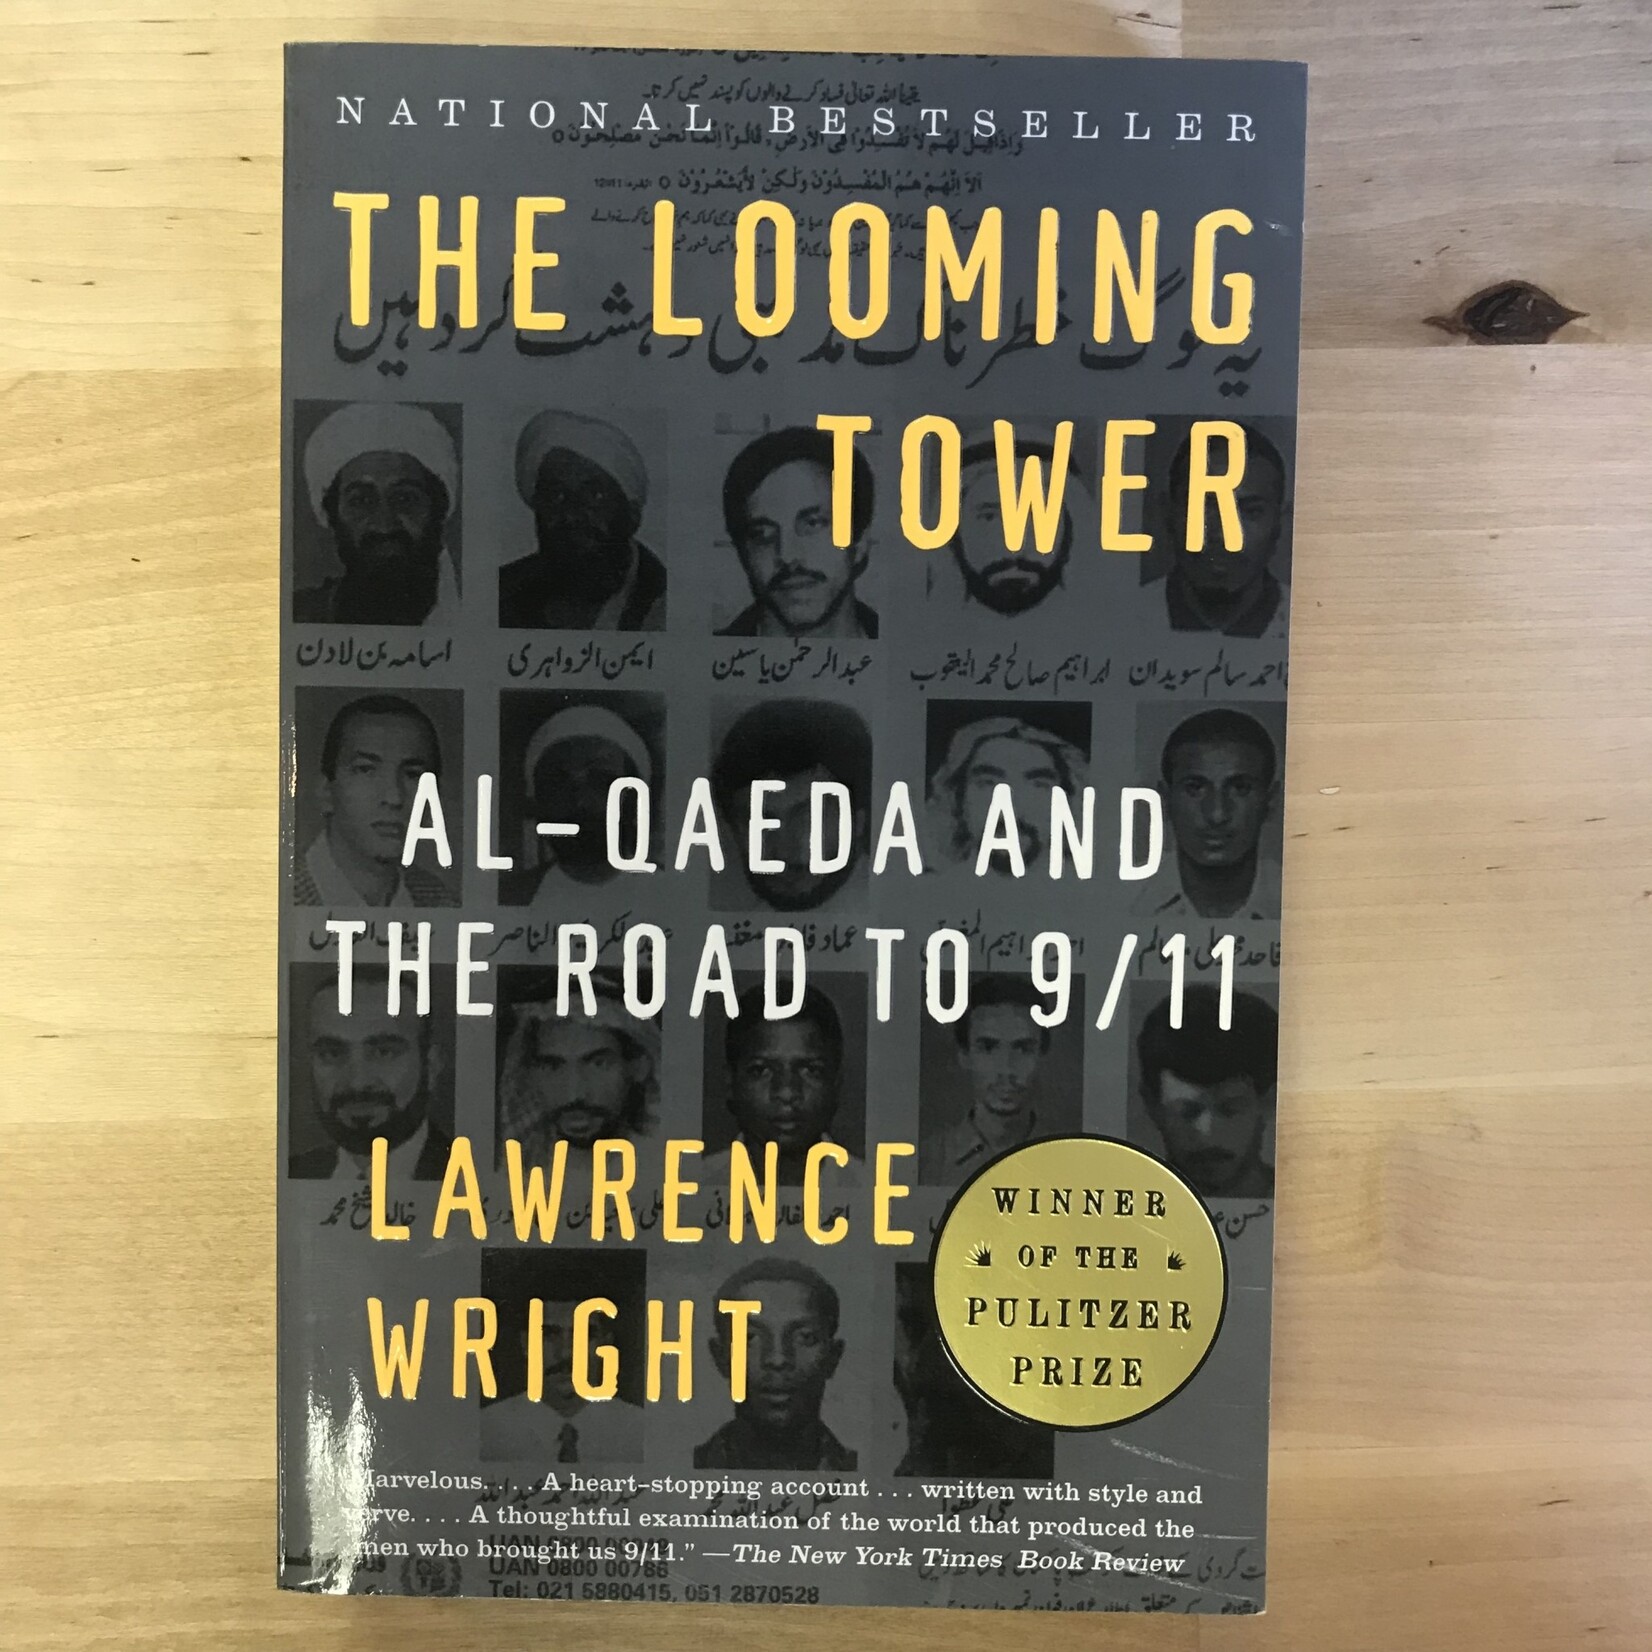 Lawrence Wright - The Looming Tower - Paperback (USED)